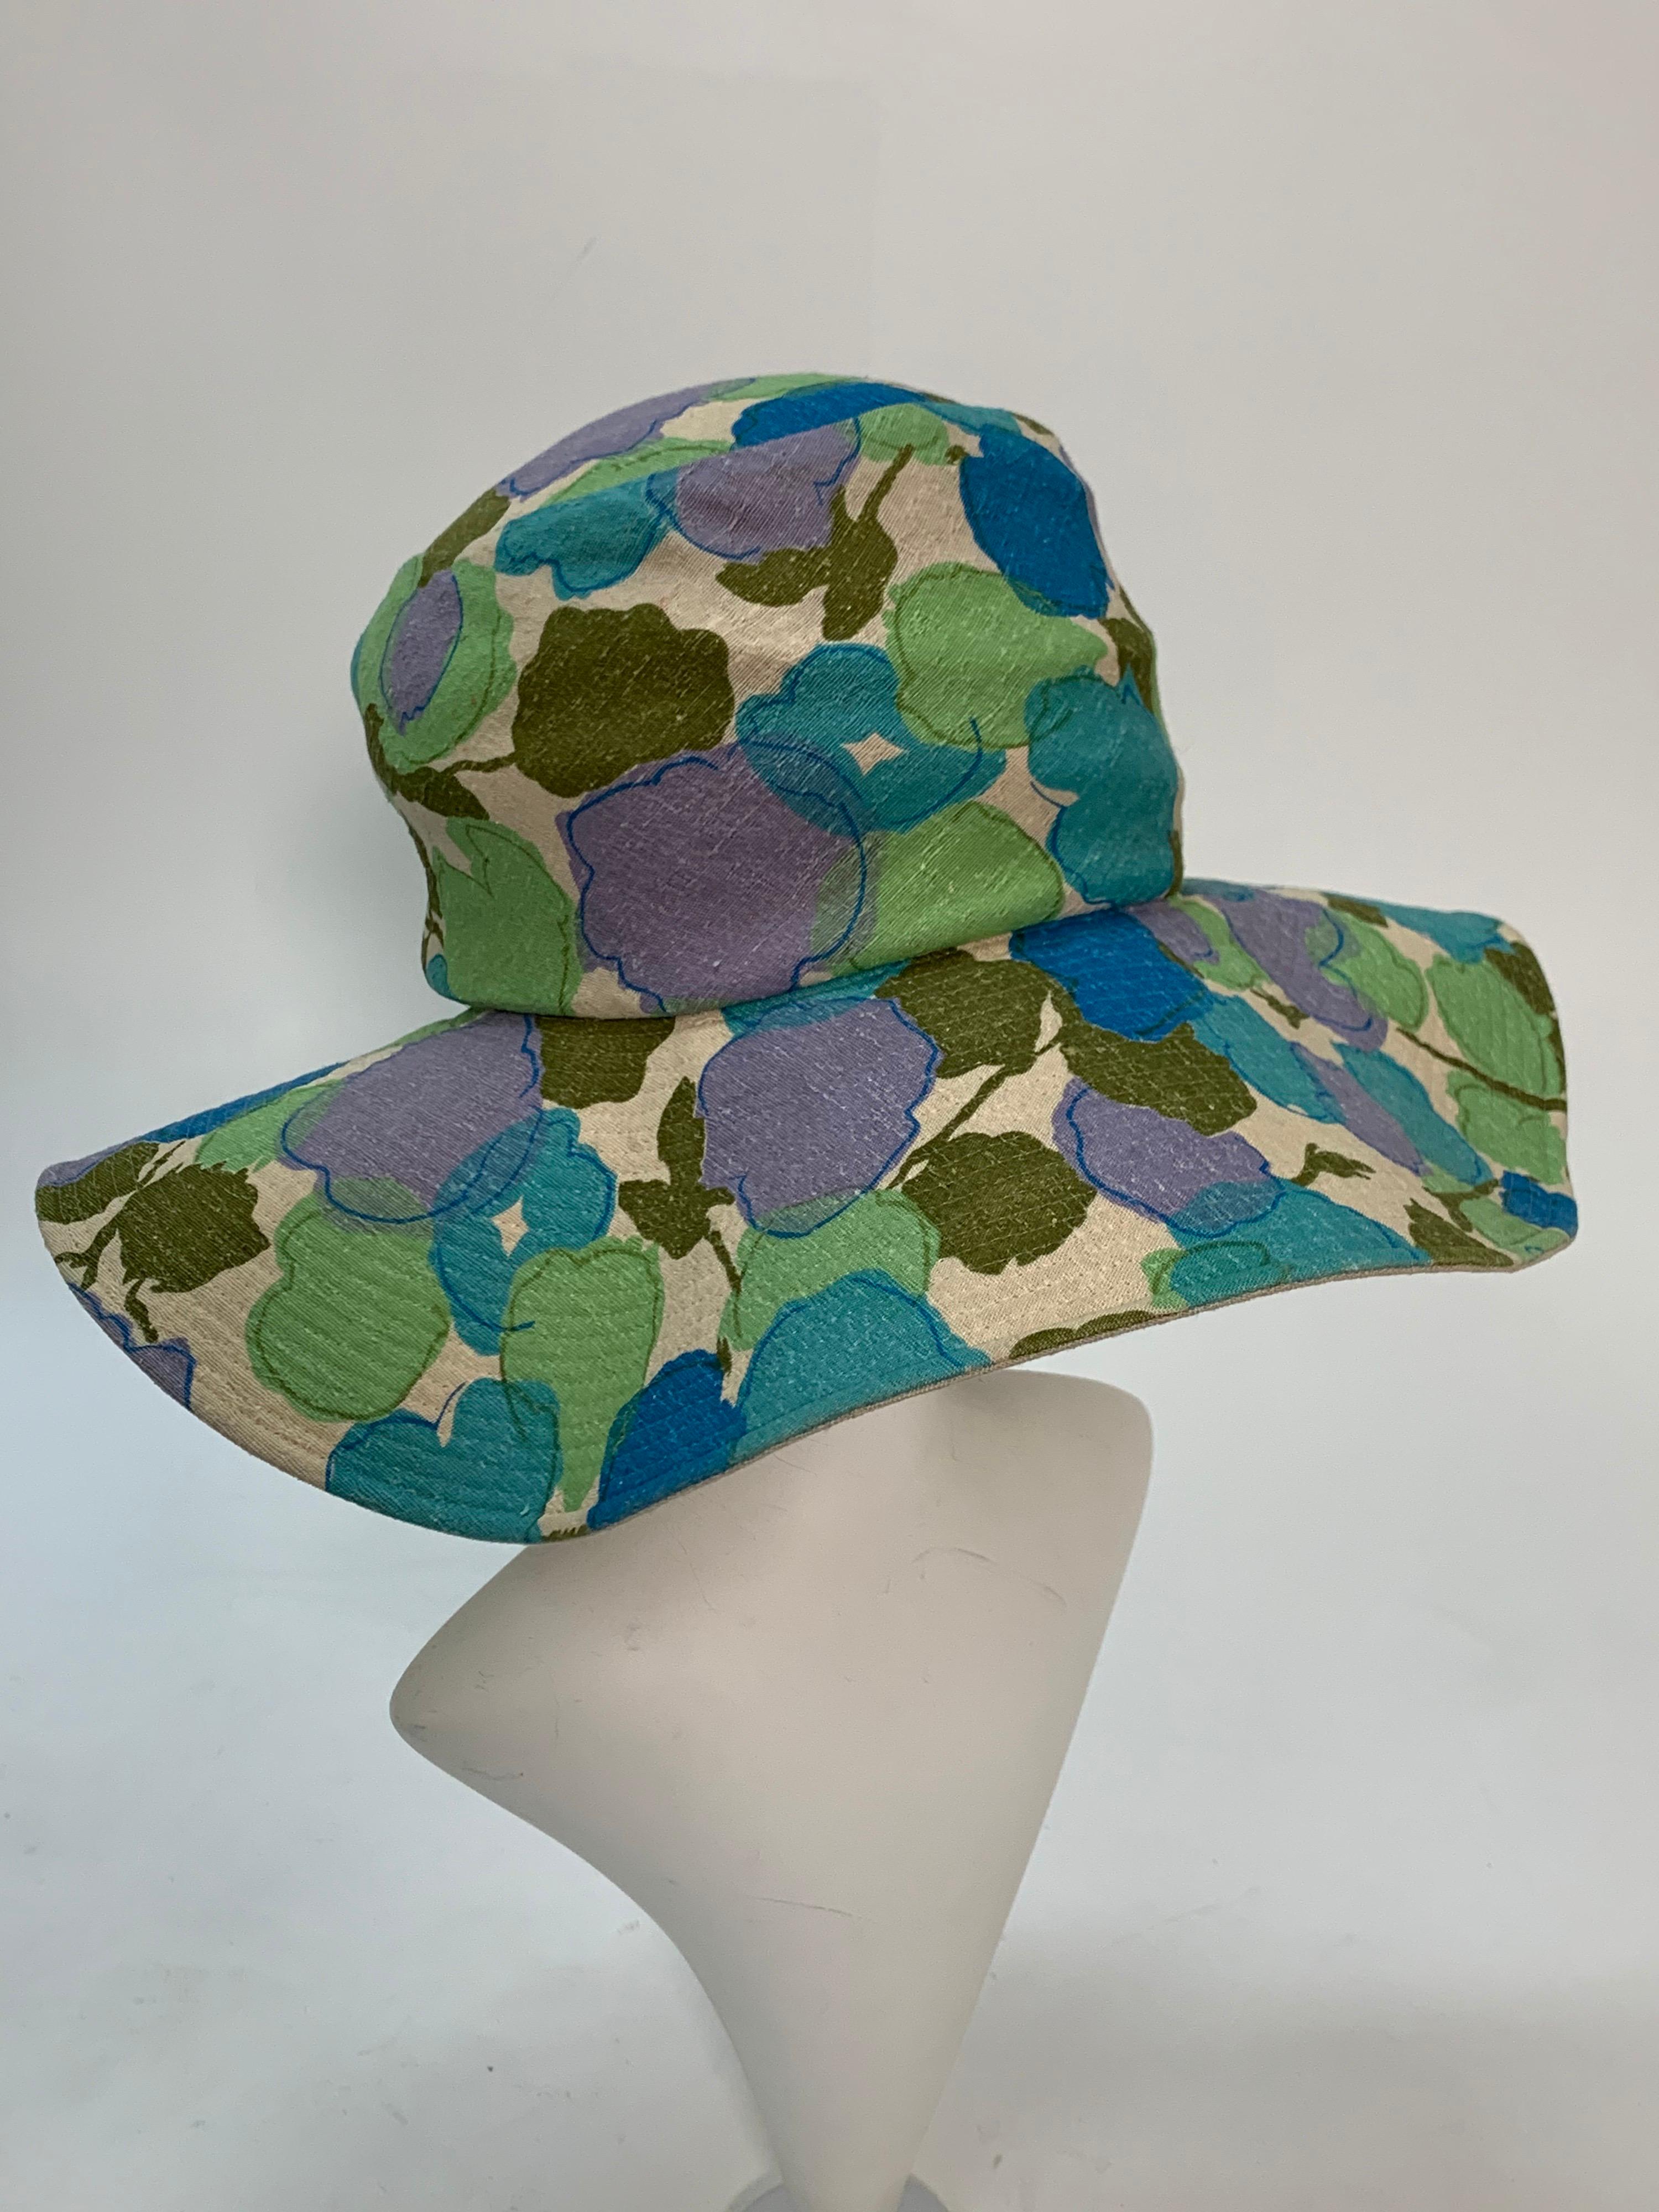 1960s Mod floral hat in mint, purple, aqua and green slubby cotton with wide brim. 